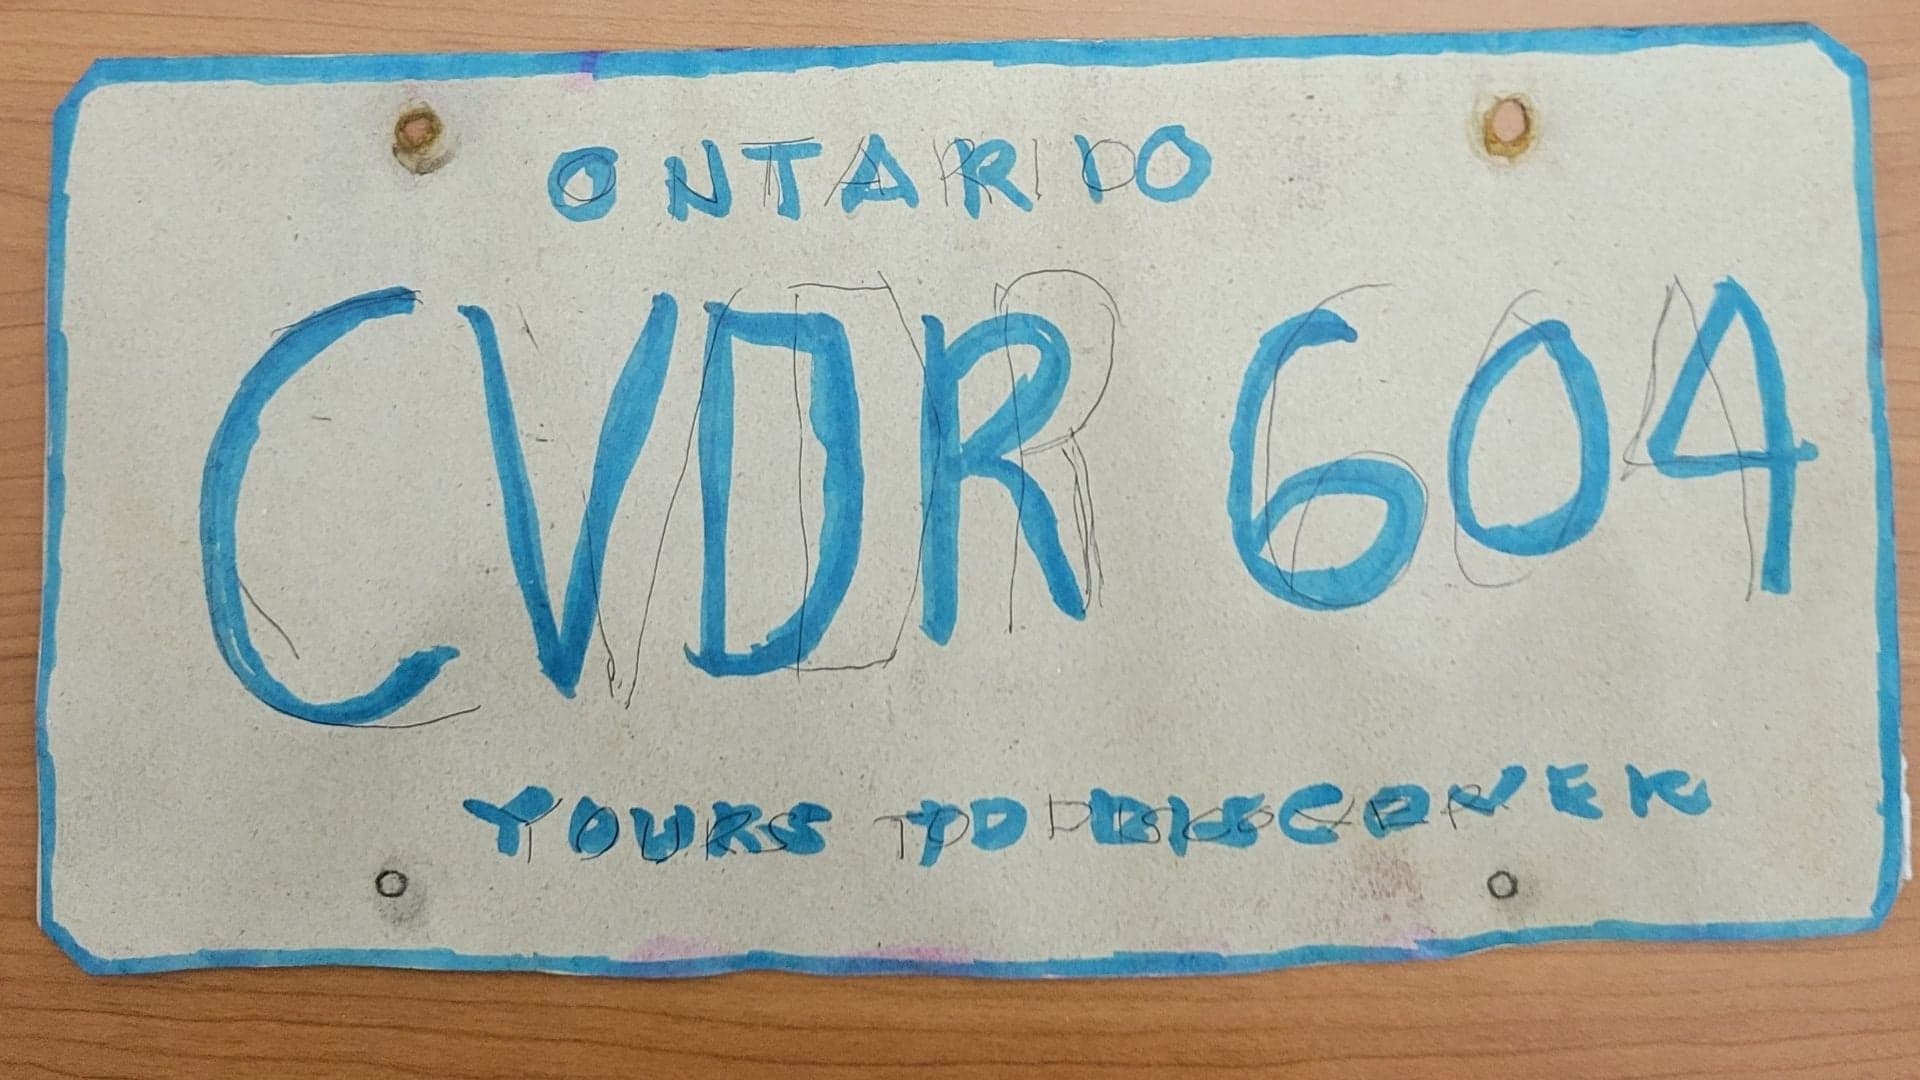 This Homemade License Plate Didn’t Work, Surprisingly